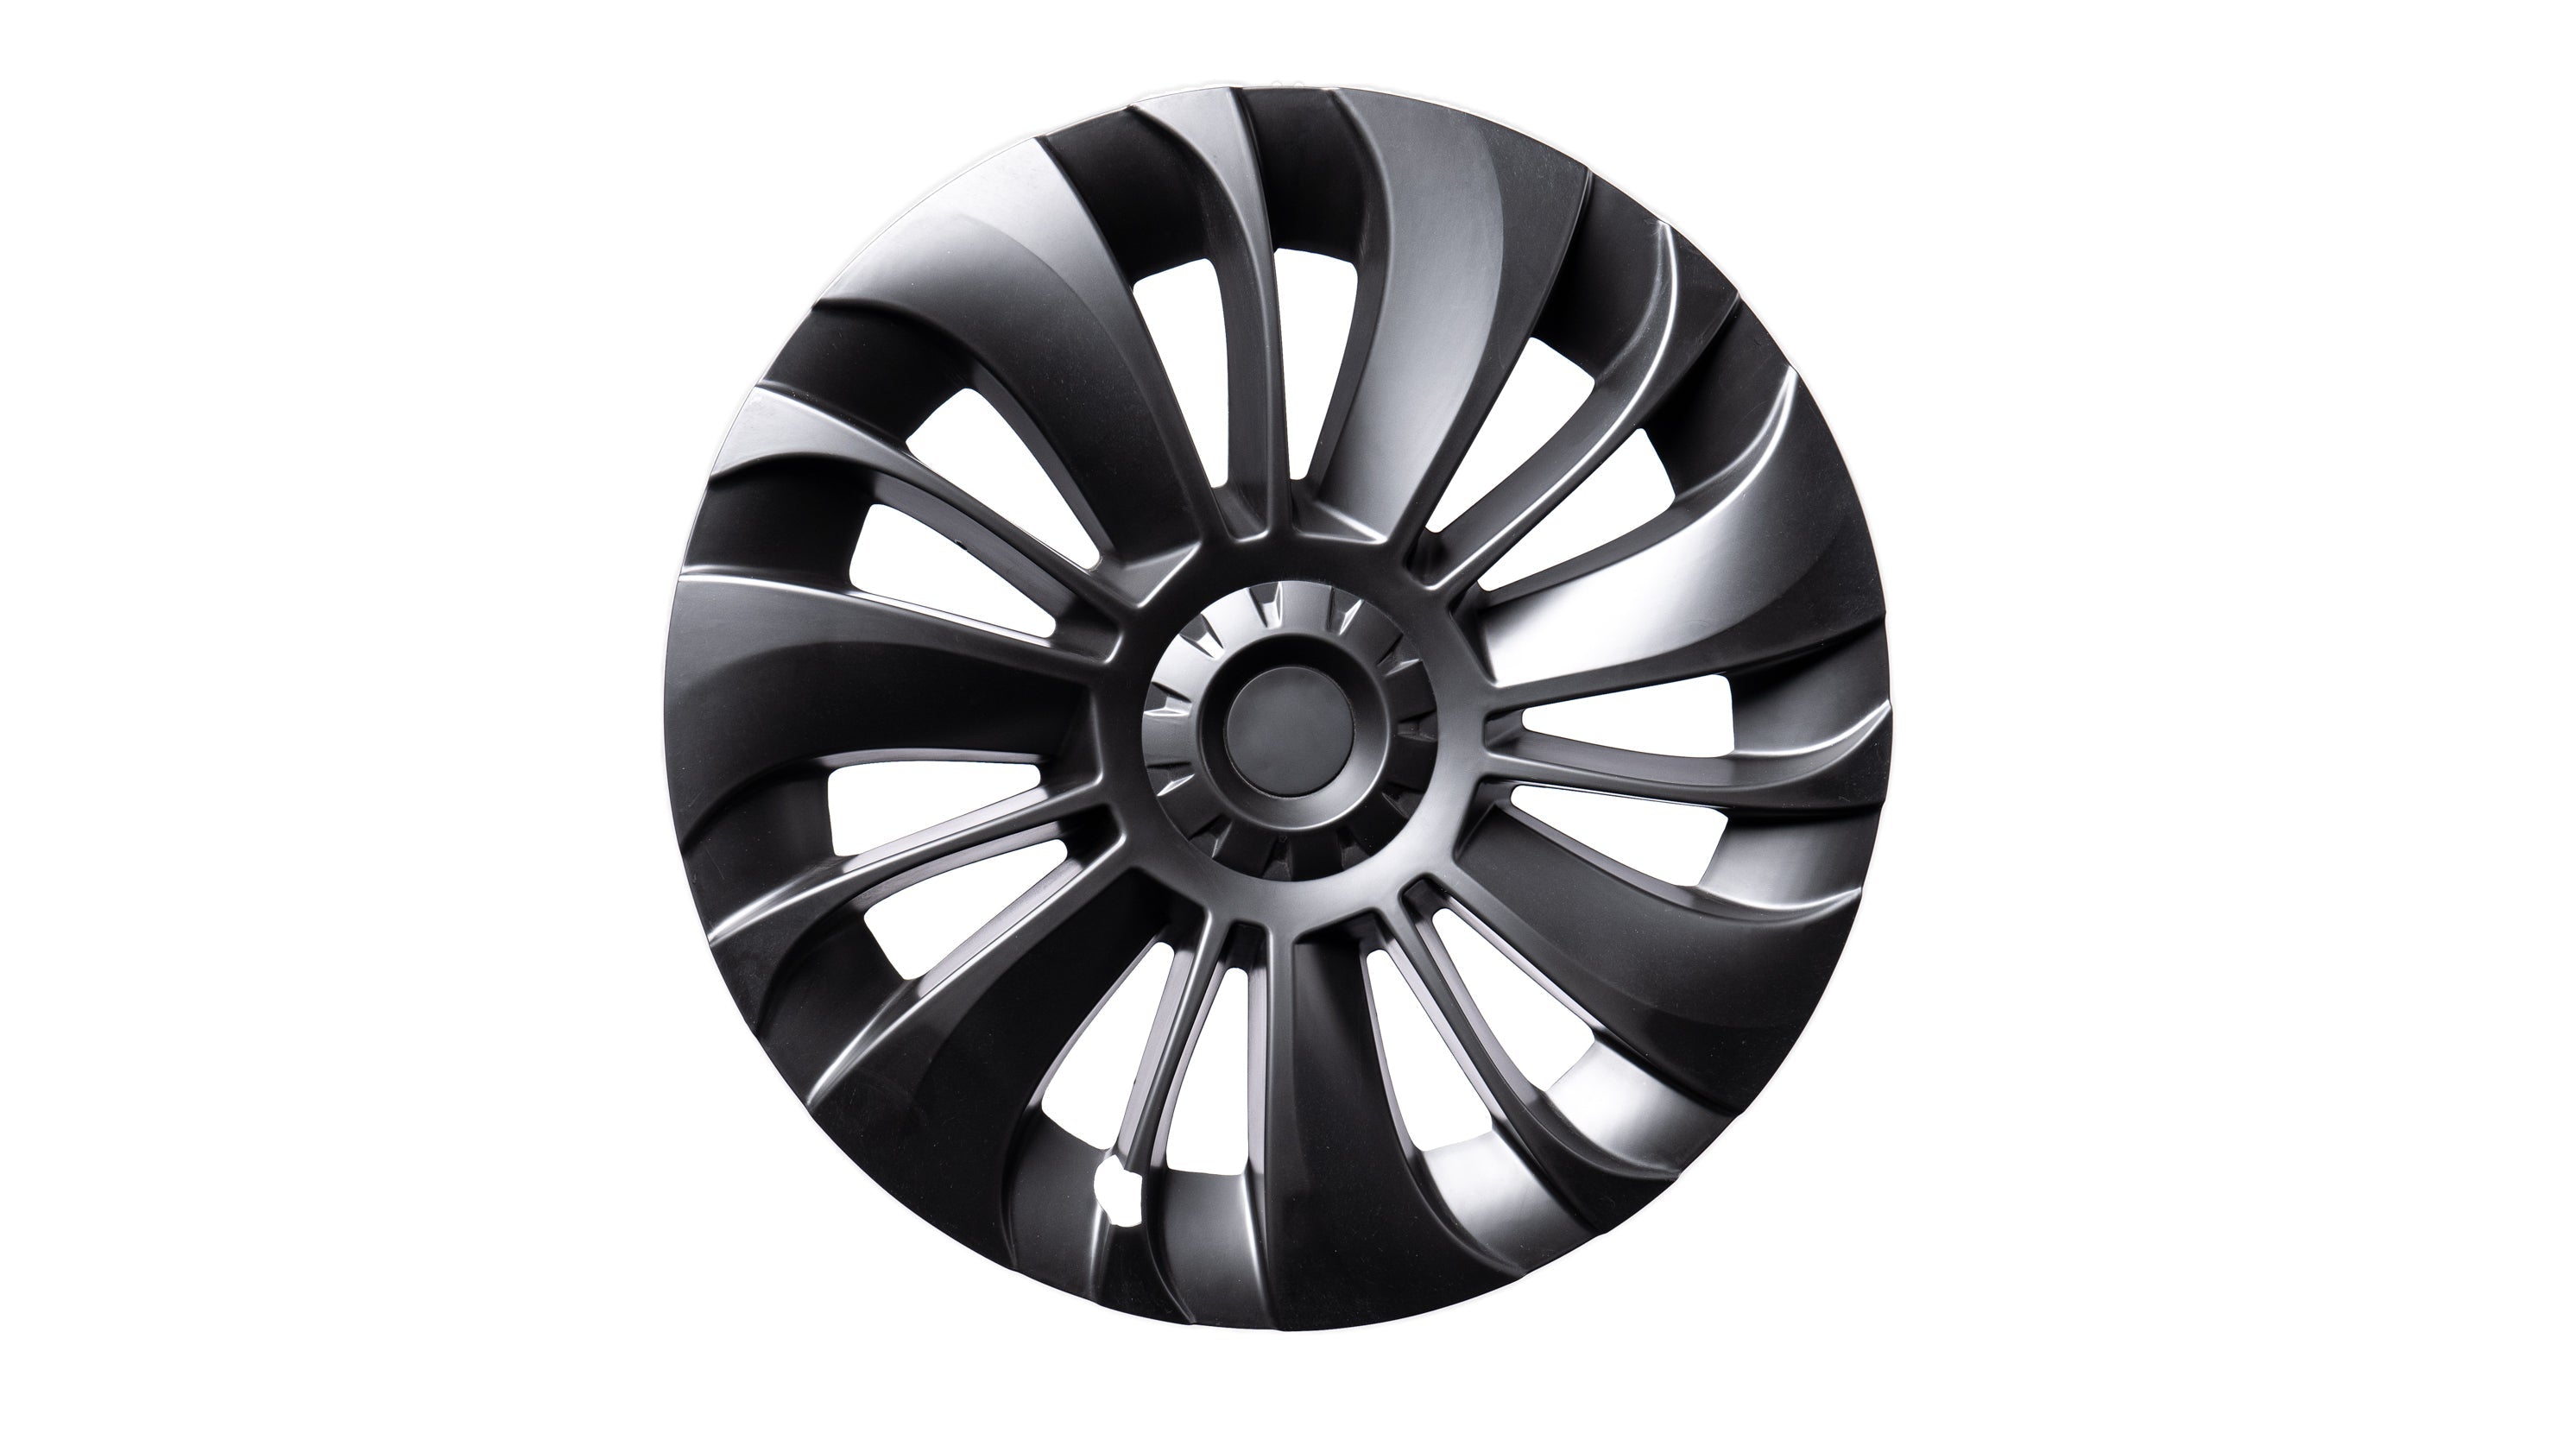 Performance hubcaps (4x) in turbine design for the Tesla Model Y